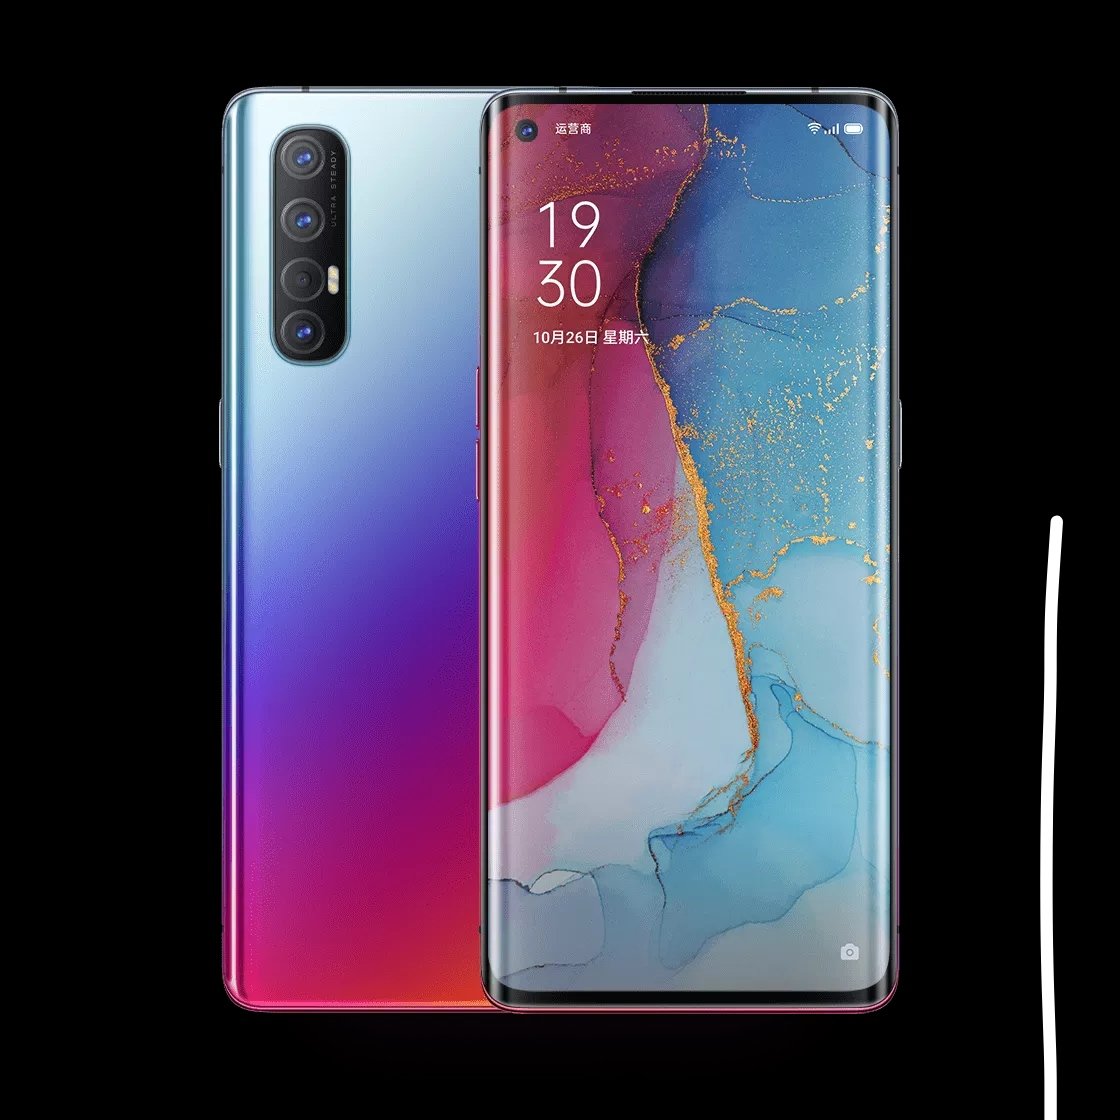 Oppo Reno3 and Reno3 Pro Launched; Both are 5G Enabled! | DroidAfrica